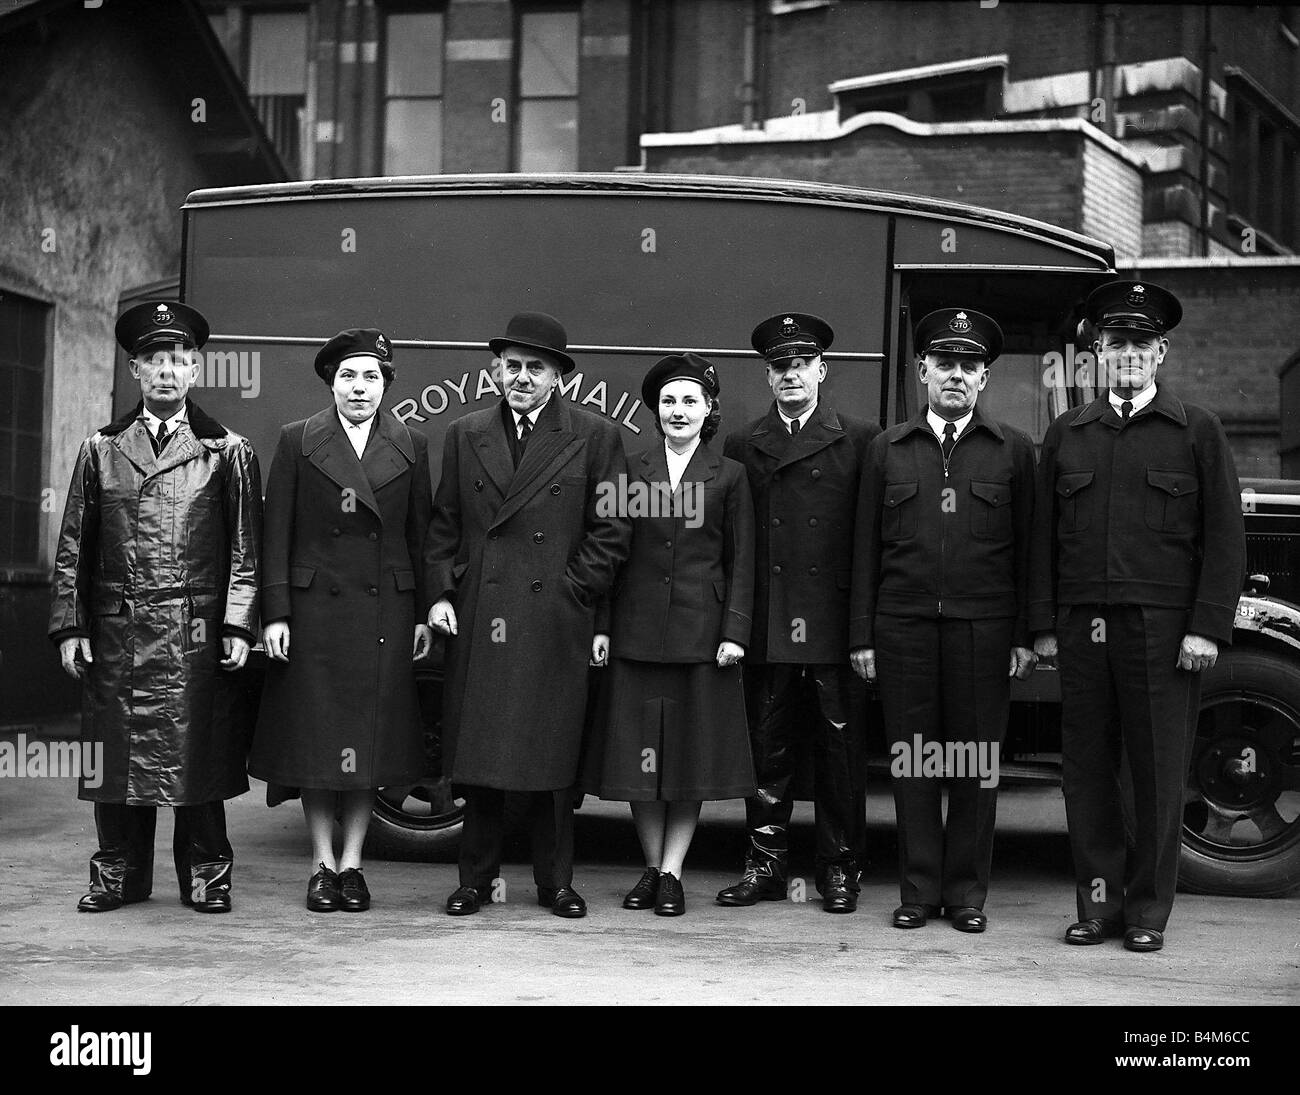 Post Office New Uniforms for Postal Workers 1952 Stock Photo